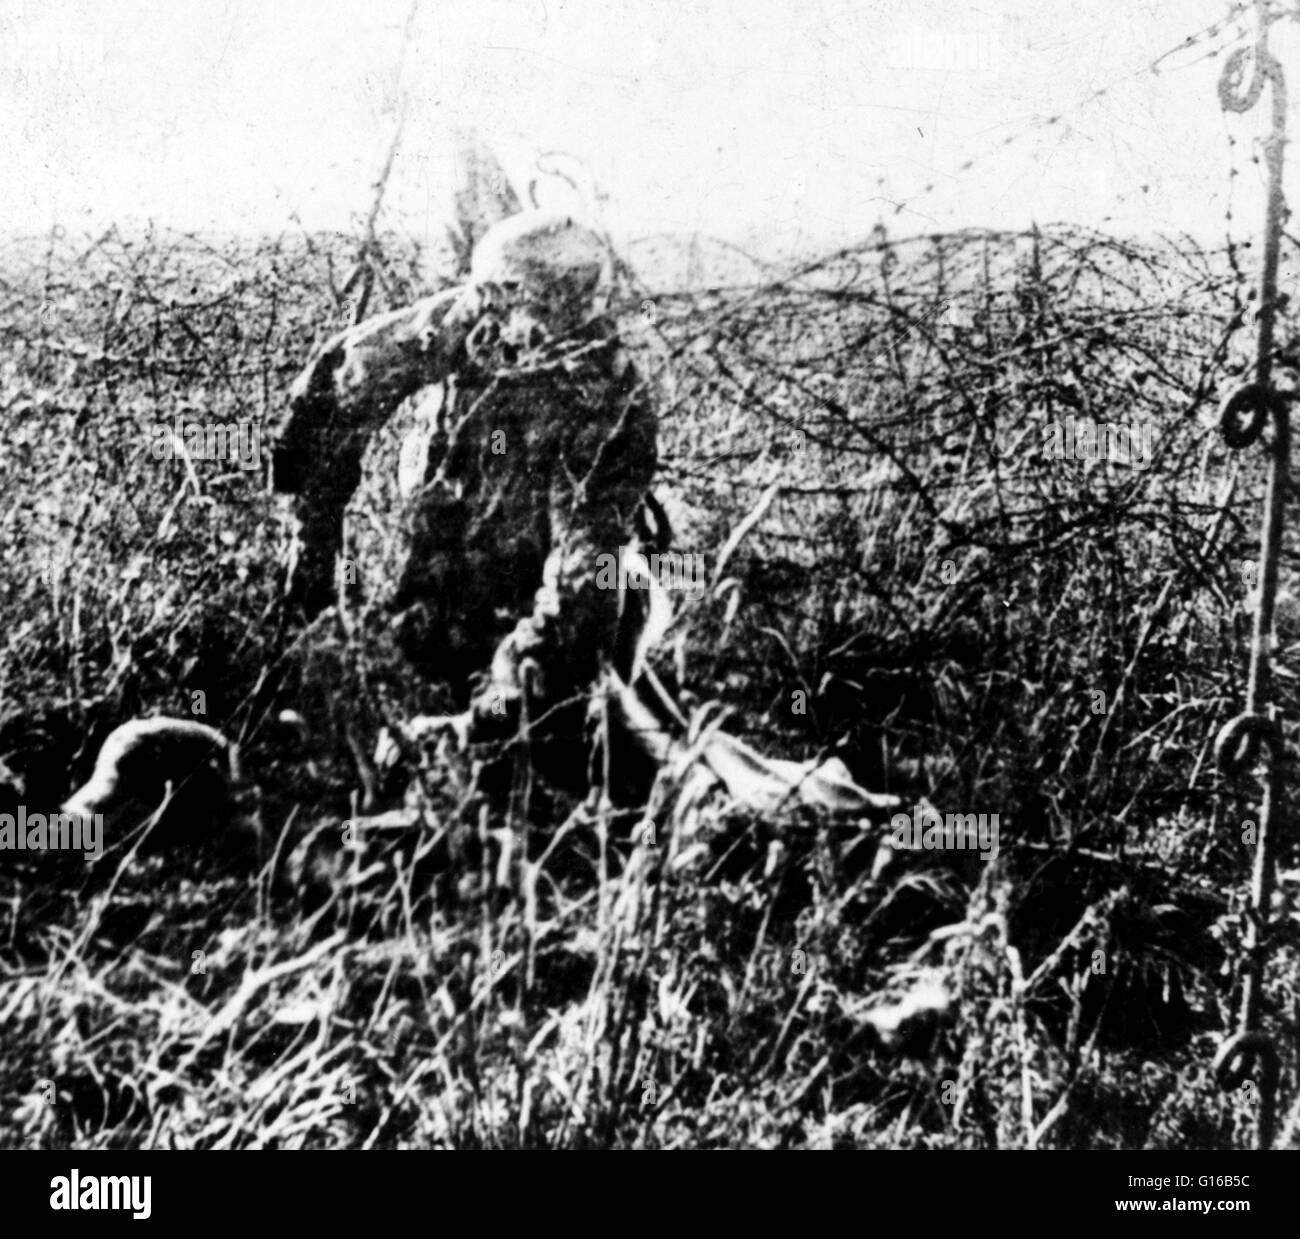 Remains of dead World War I soldier hanging on barbed wire. In World War I, no man's land was often ranged from several hundred yards to in some cases less than 10 yards. Heavily defended by machine guns, mortars, artillery and riflemen on both sides, it Stock Photo